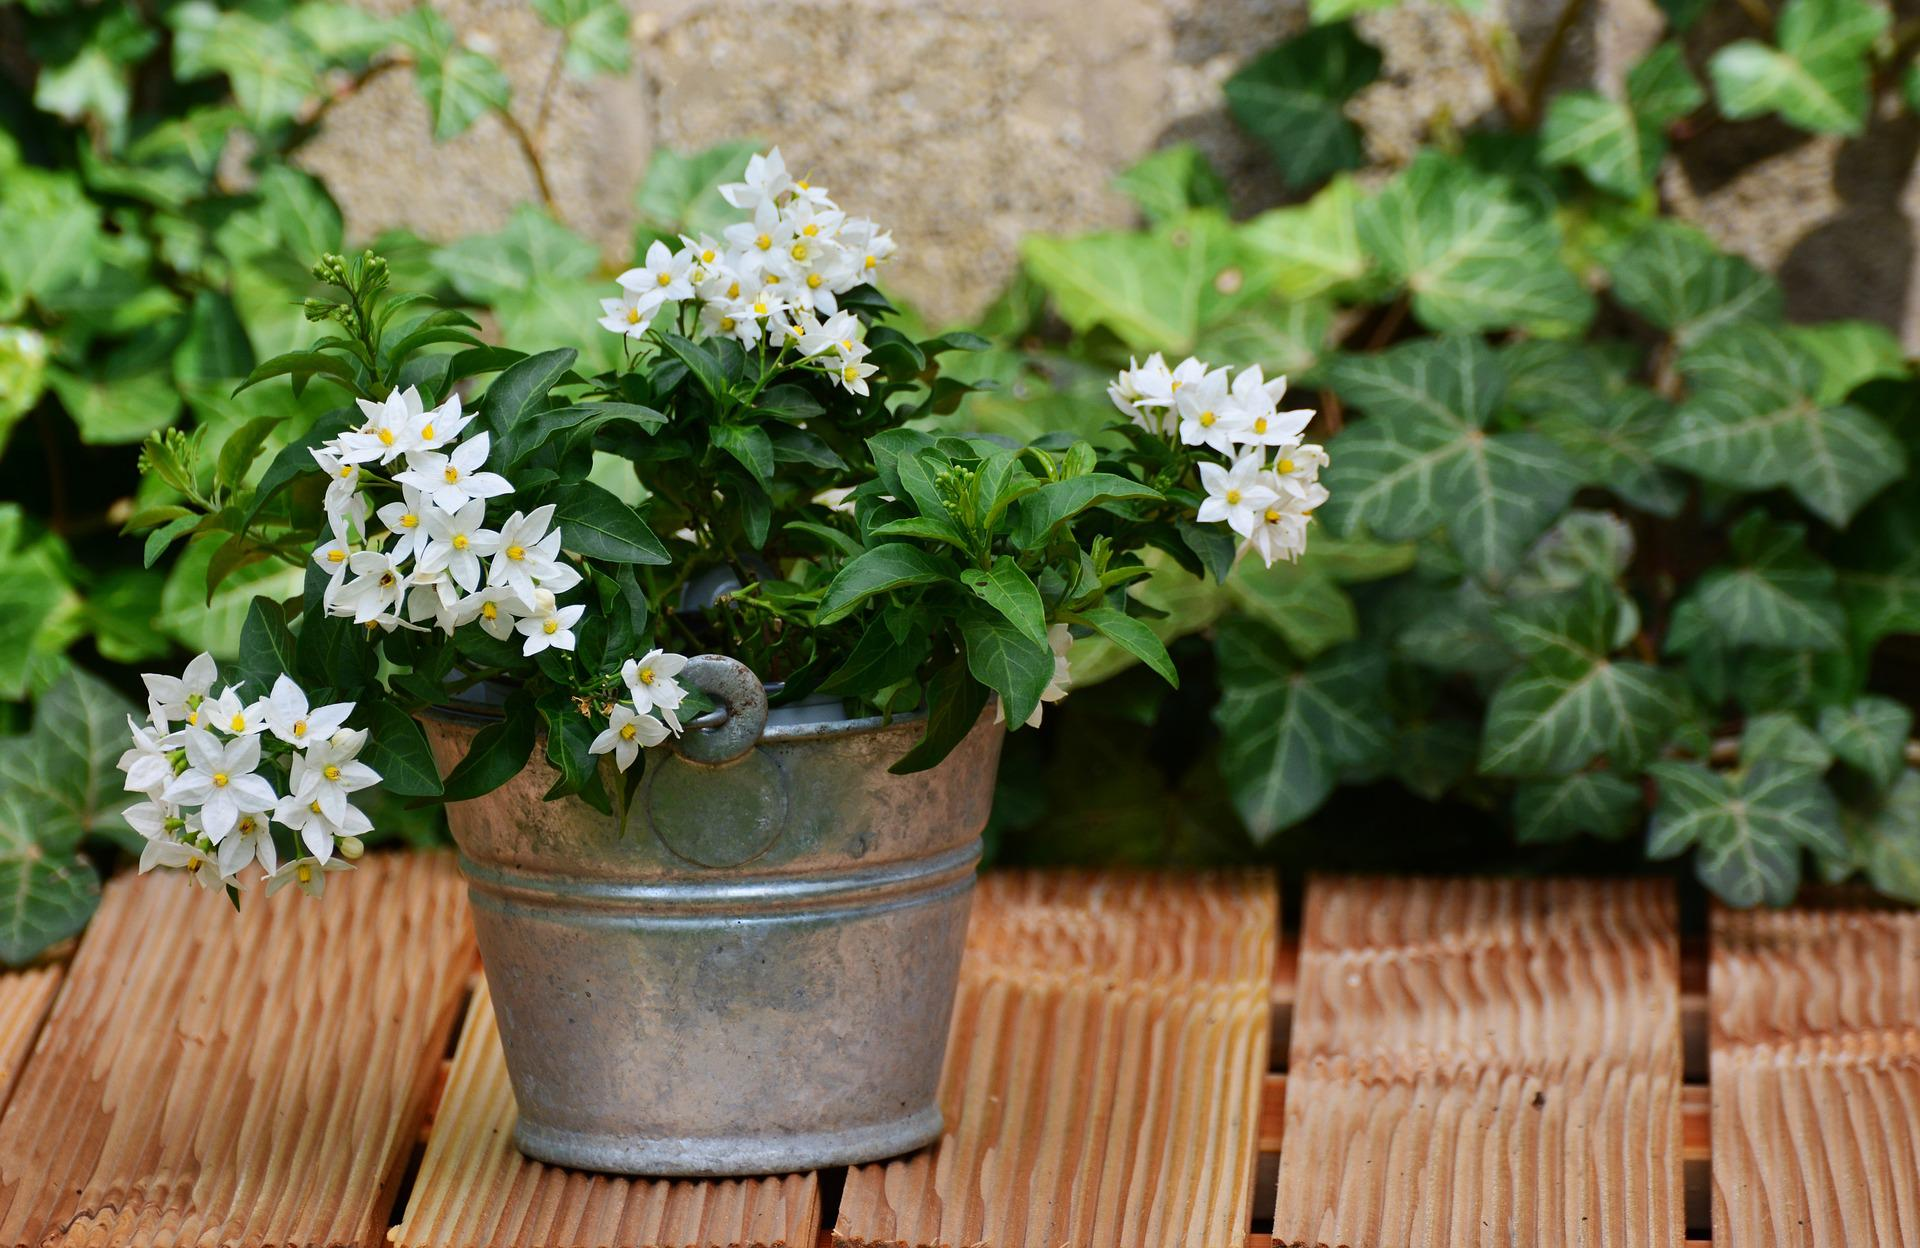 How To Care For Jasmine Plants In Pots: Water Them Regularly